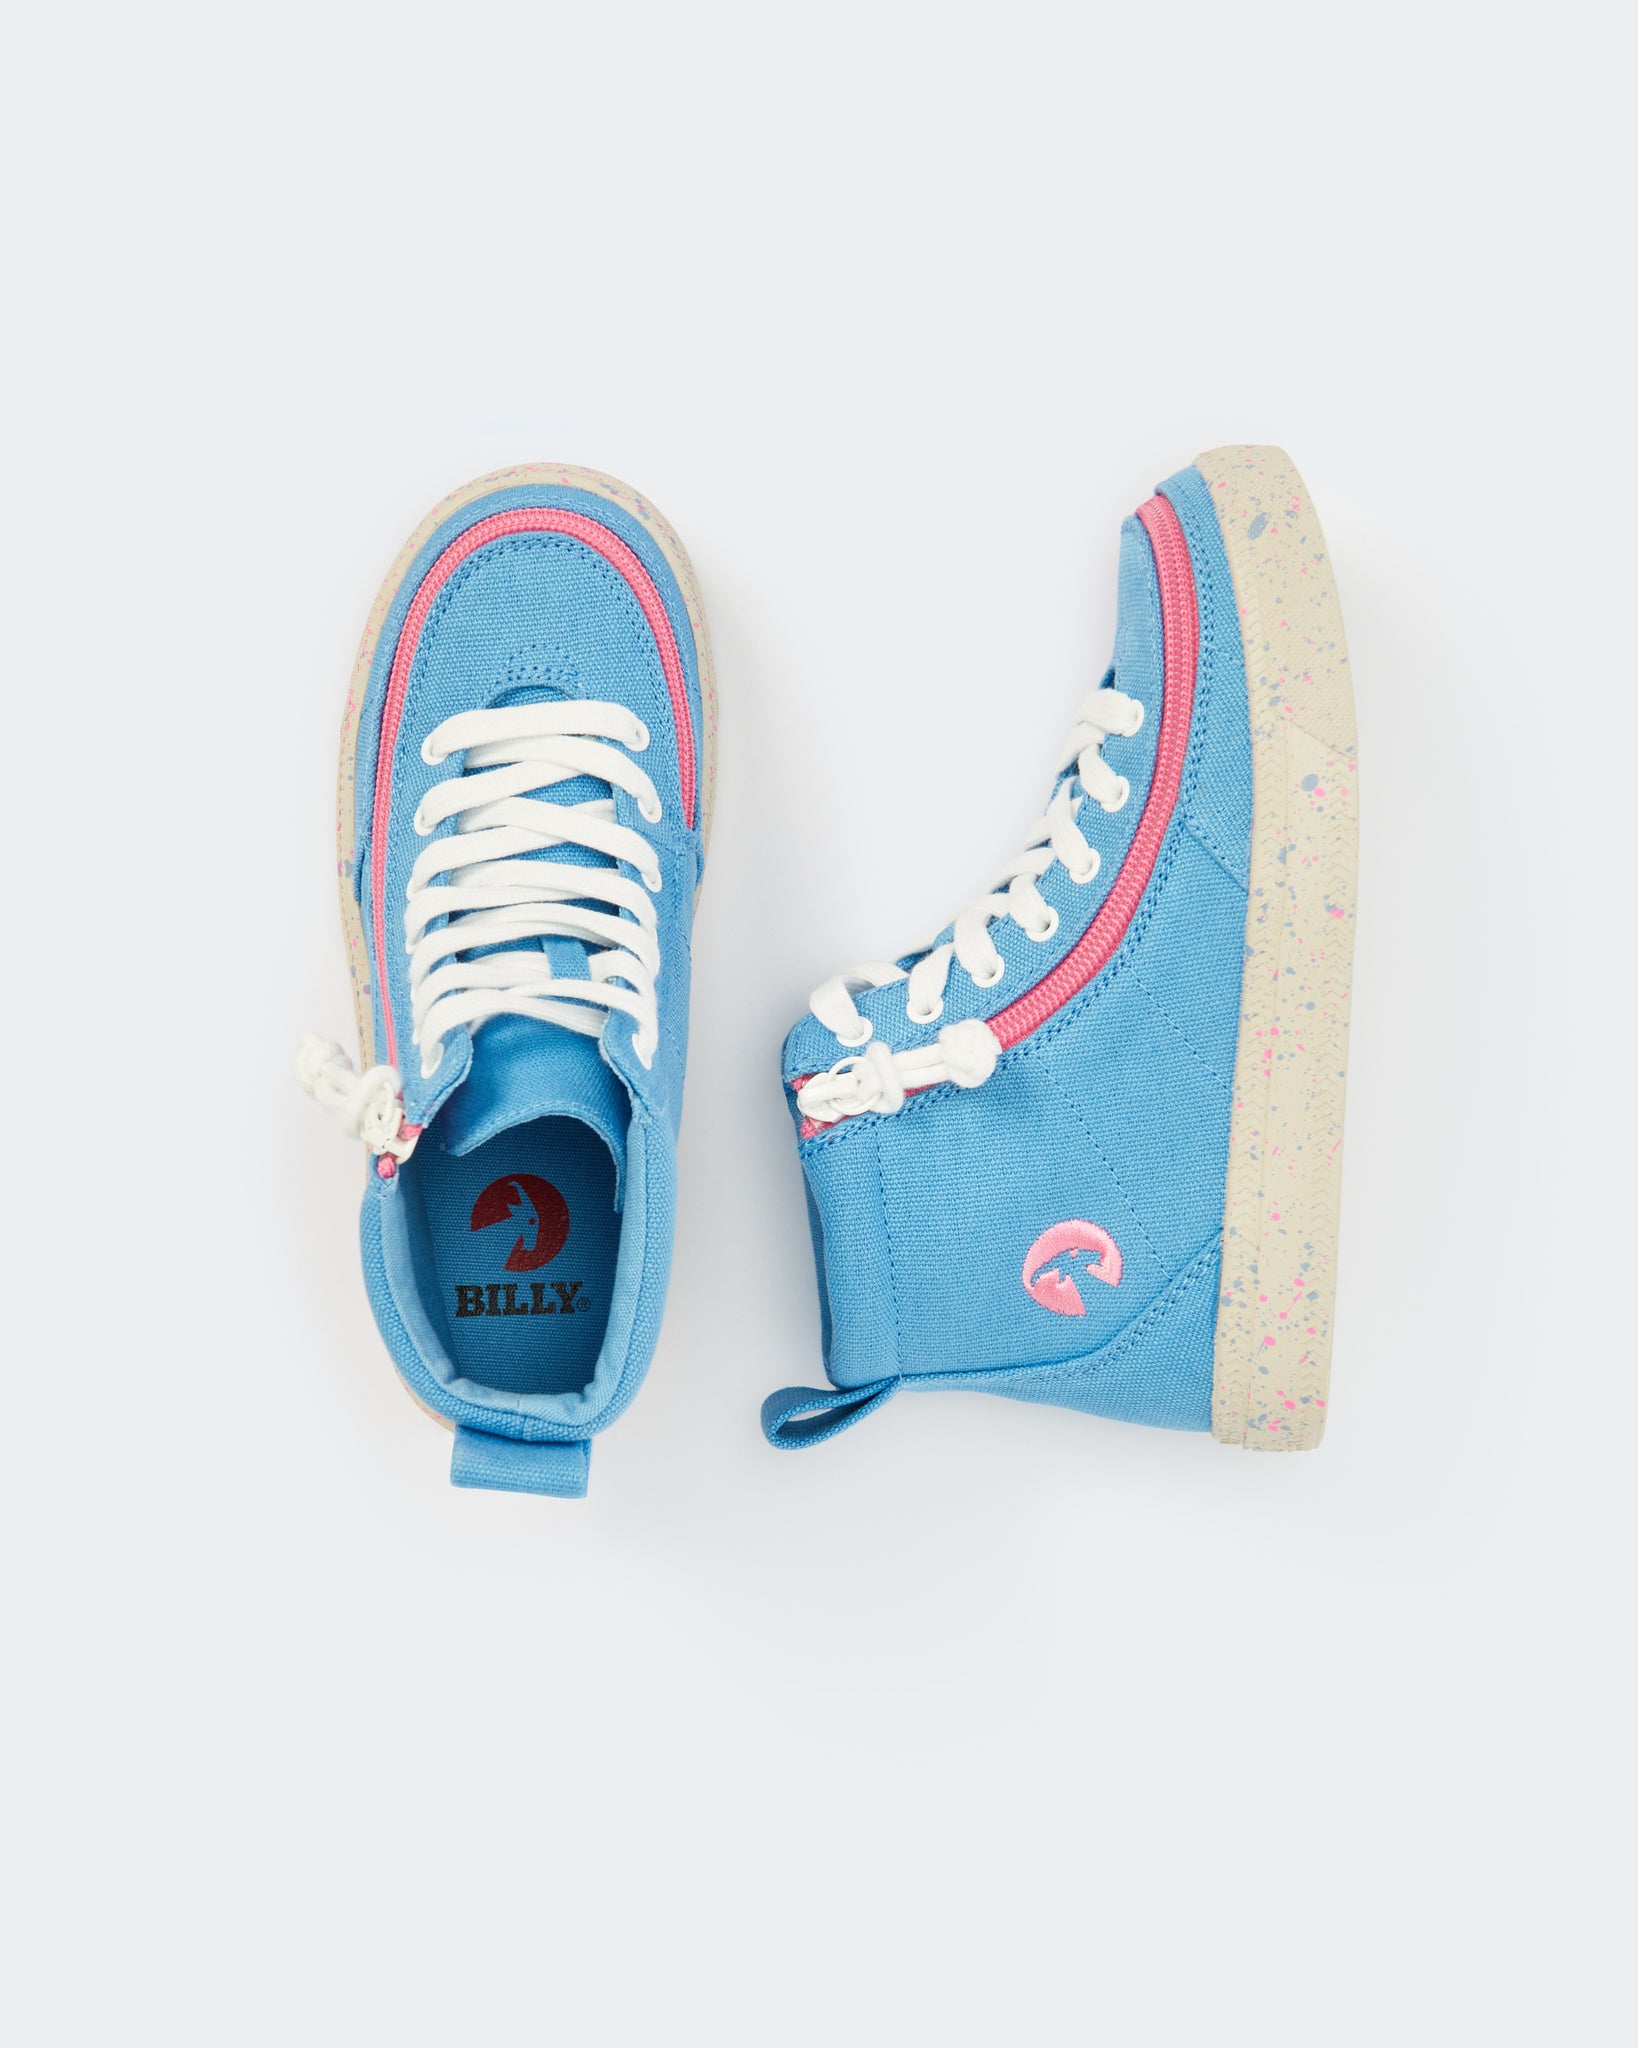 Classic High Top (Kids) - Blue/Pink Speckle